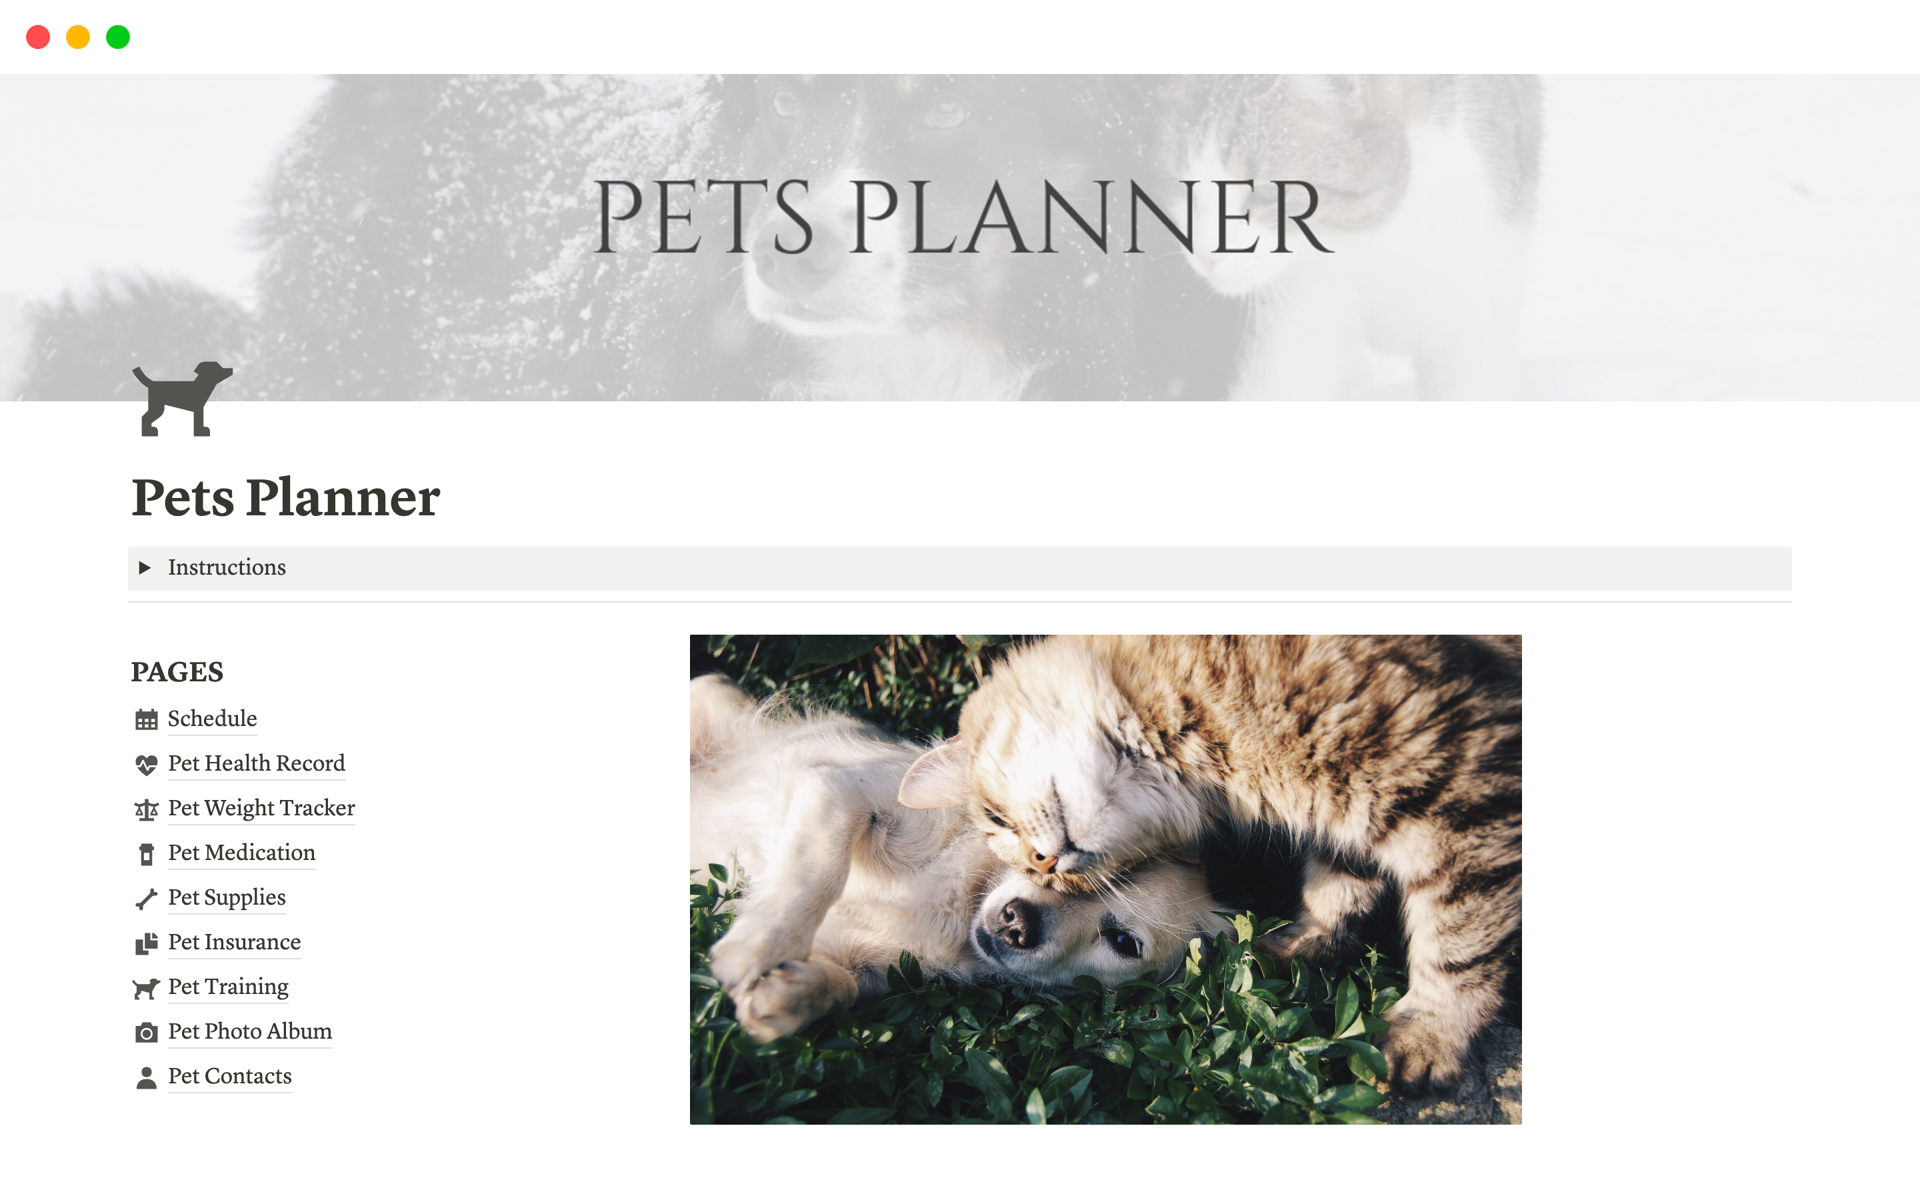 This Pet planner template is perfect for anyone who wants to keep track of their furry friend's activities and health in one central location.